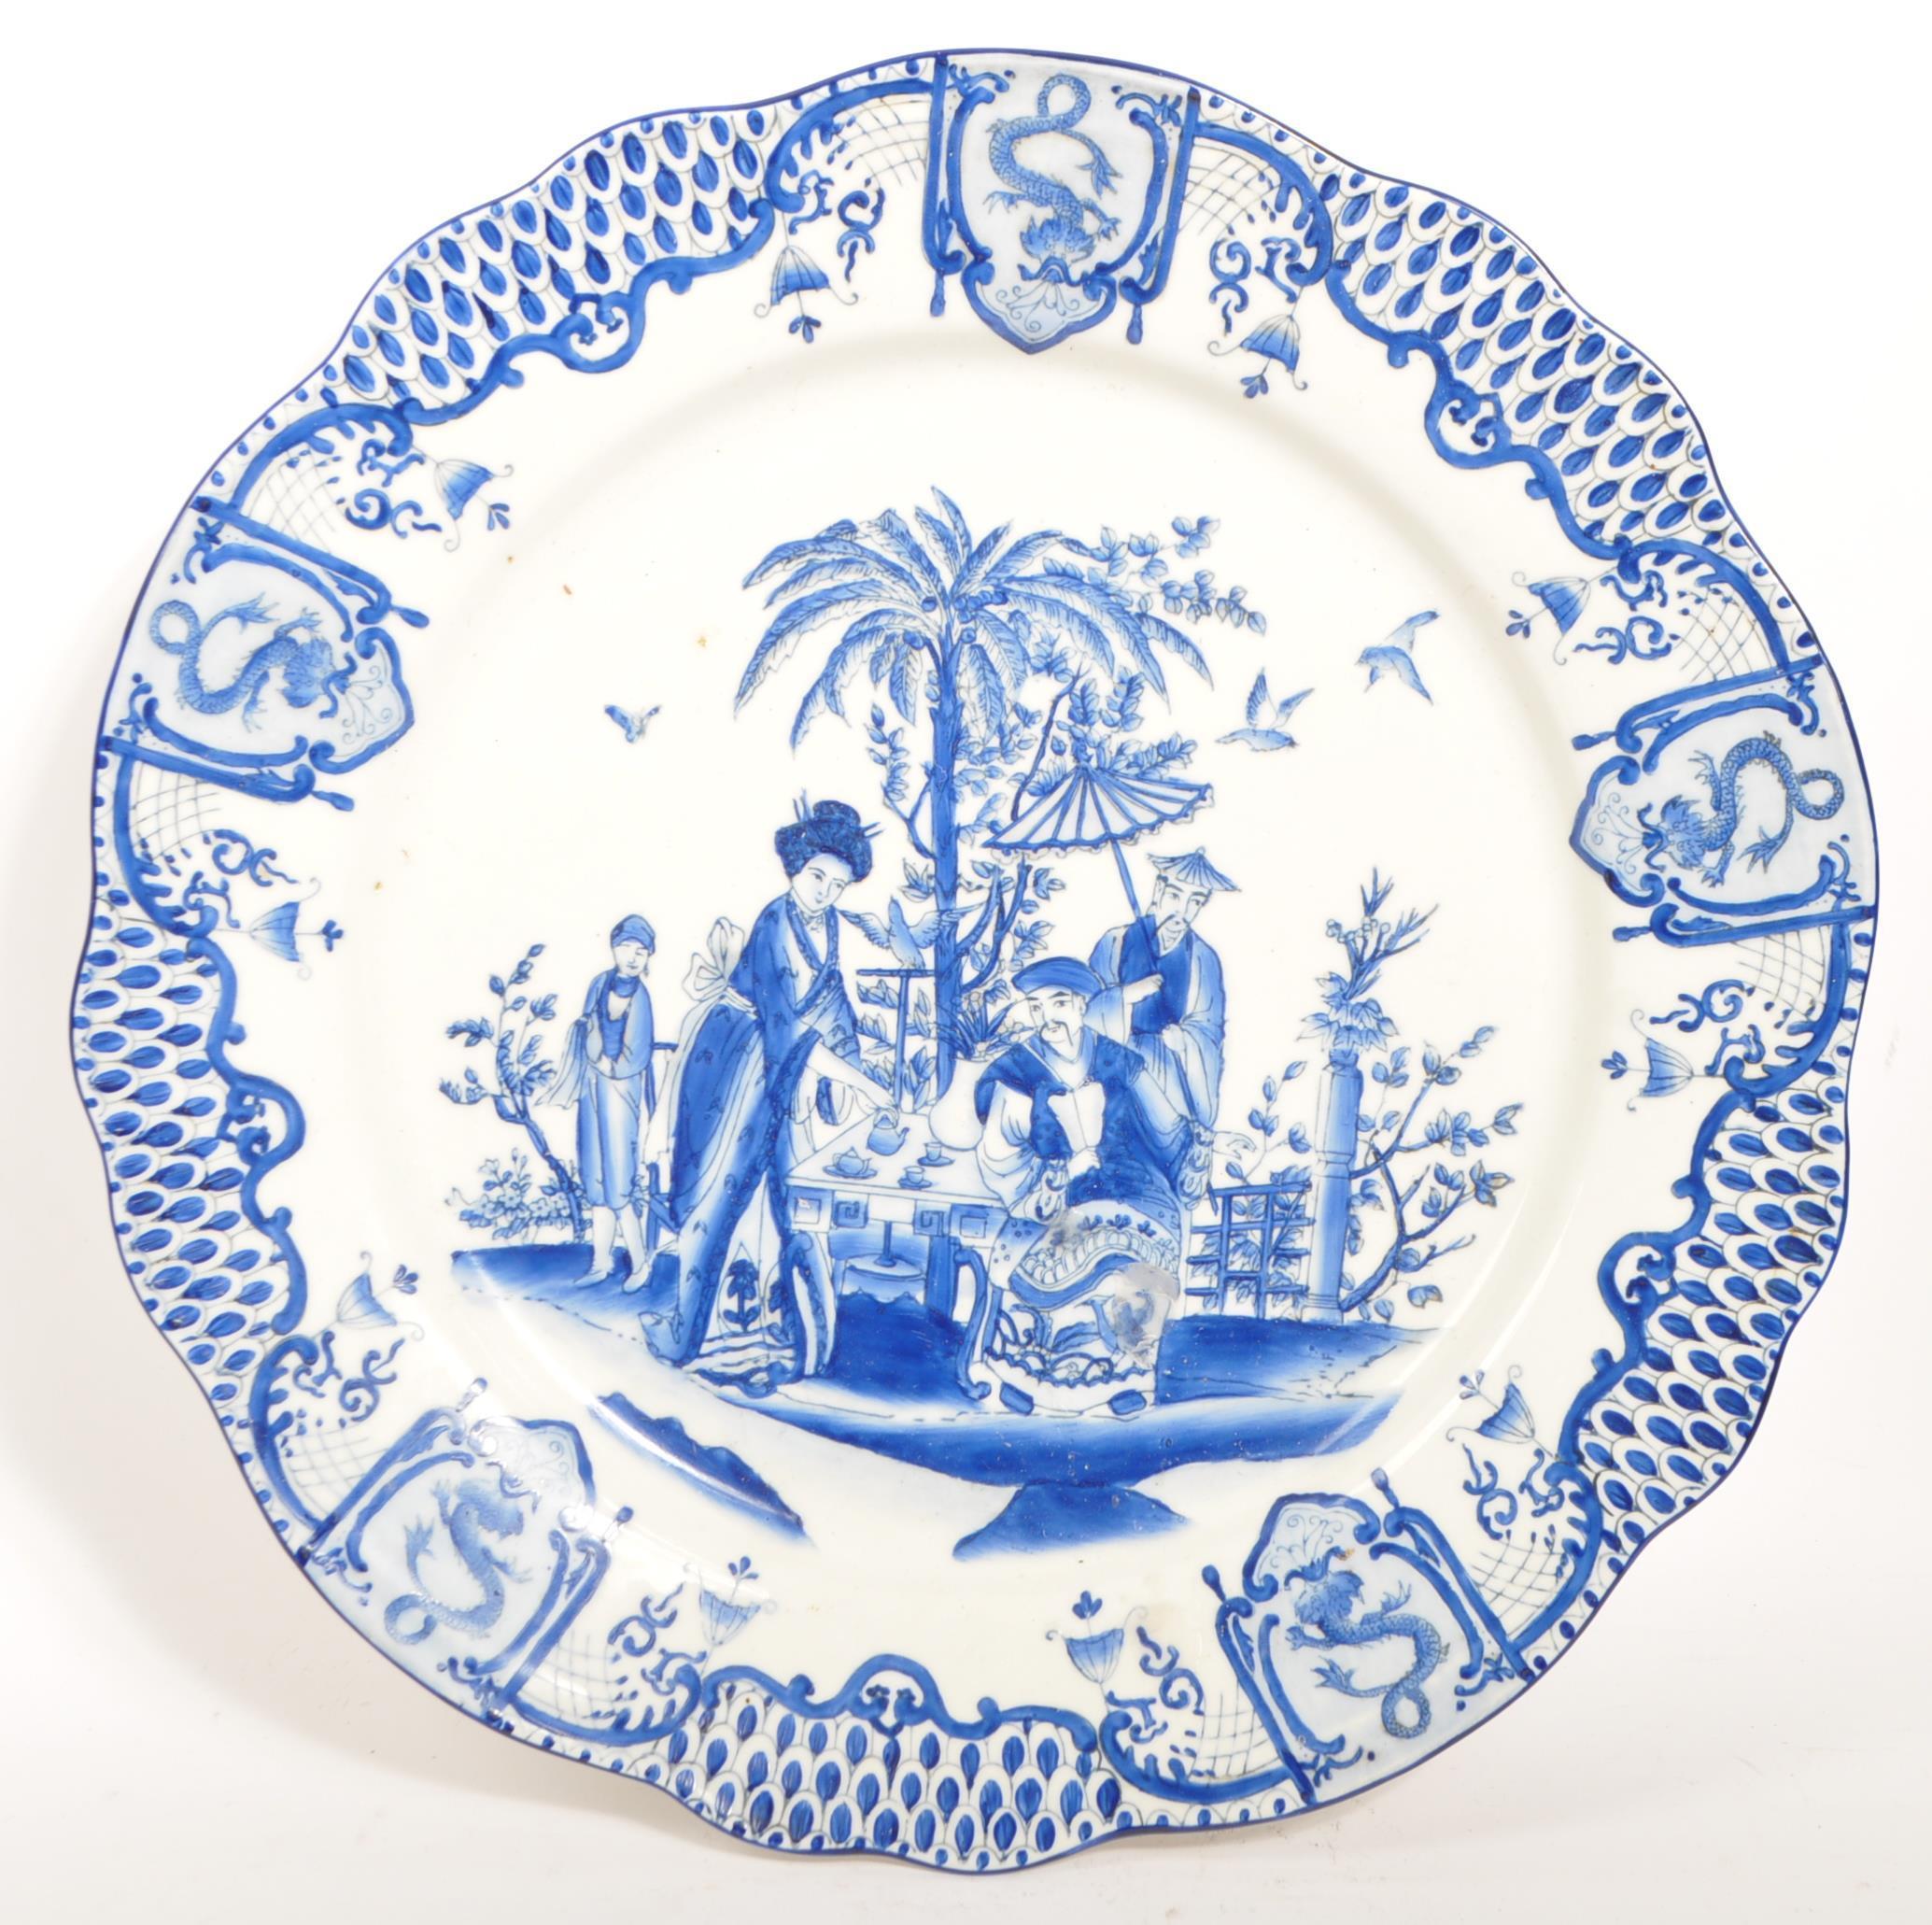 COLLECTION OF 19TH CENTURY & LATER CERAMIC DISPLAY PLATES - Image 6 of 10